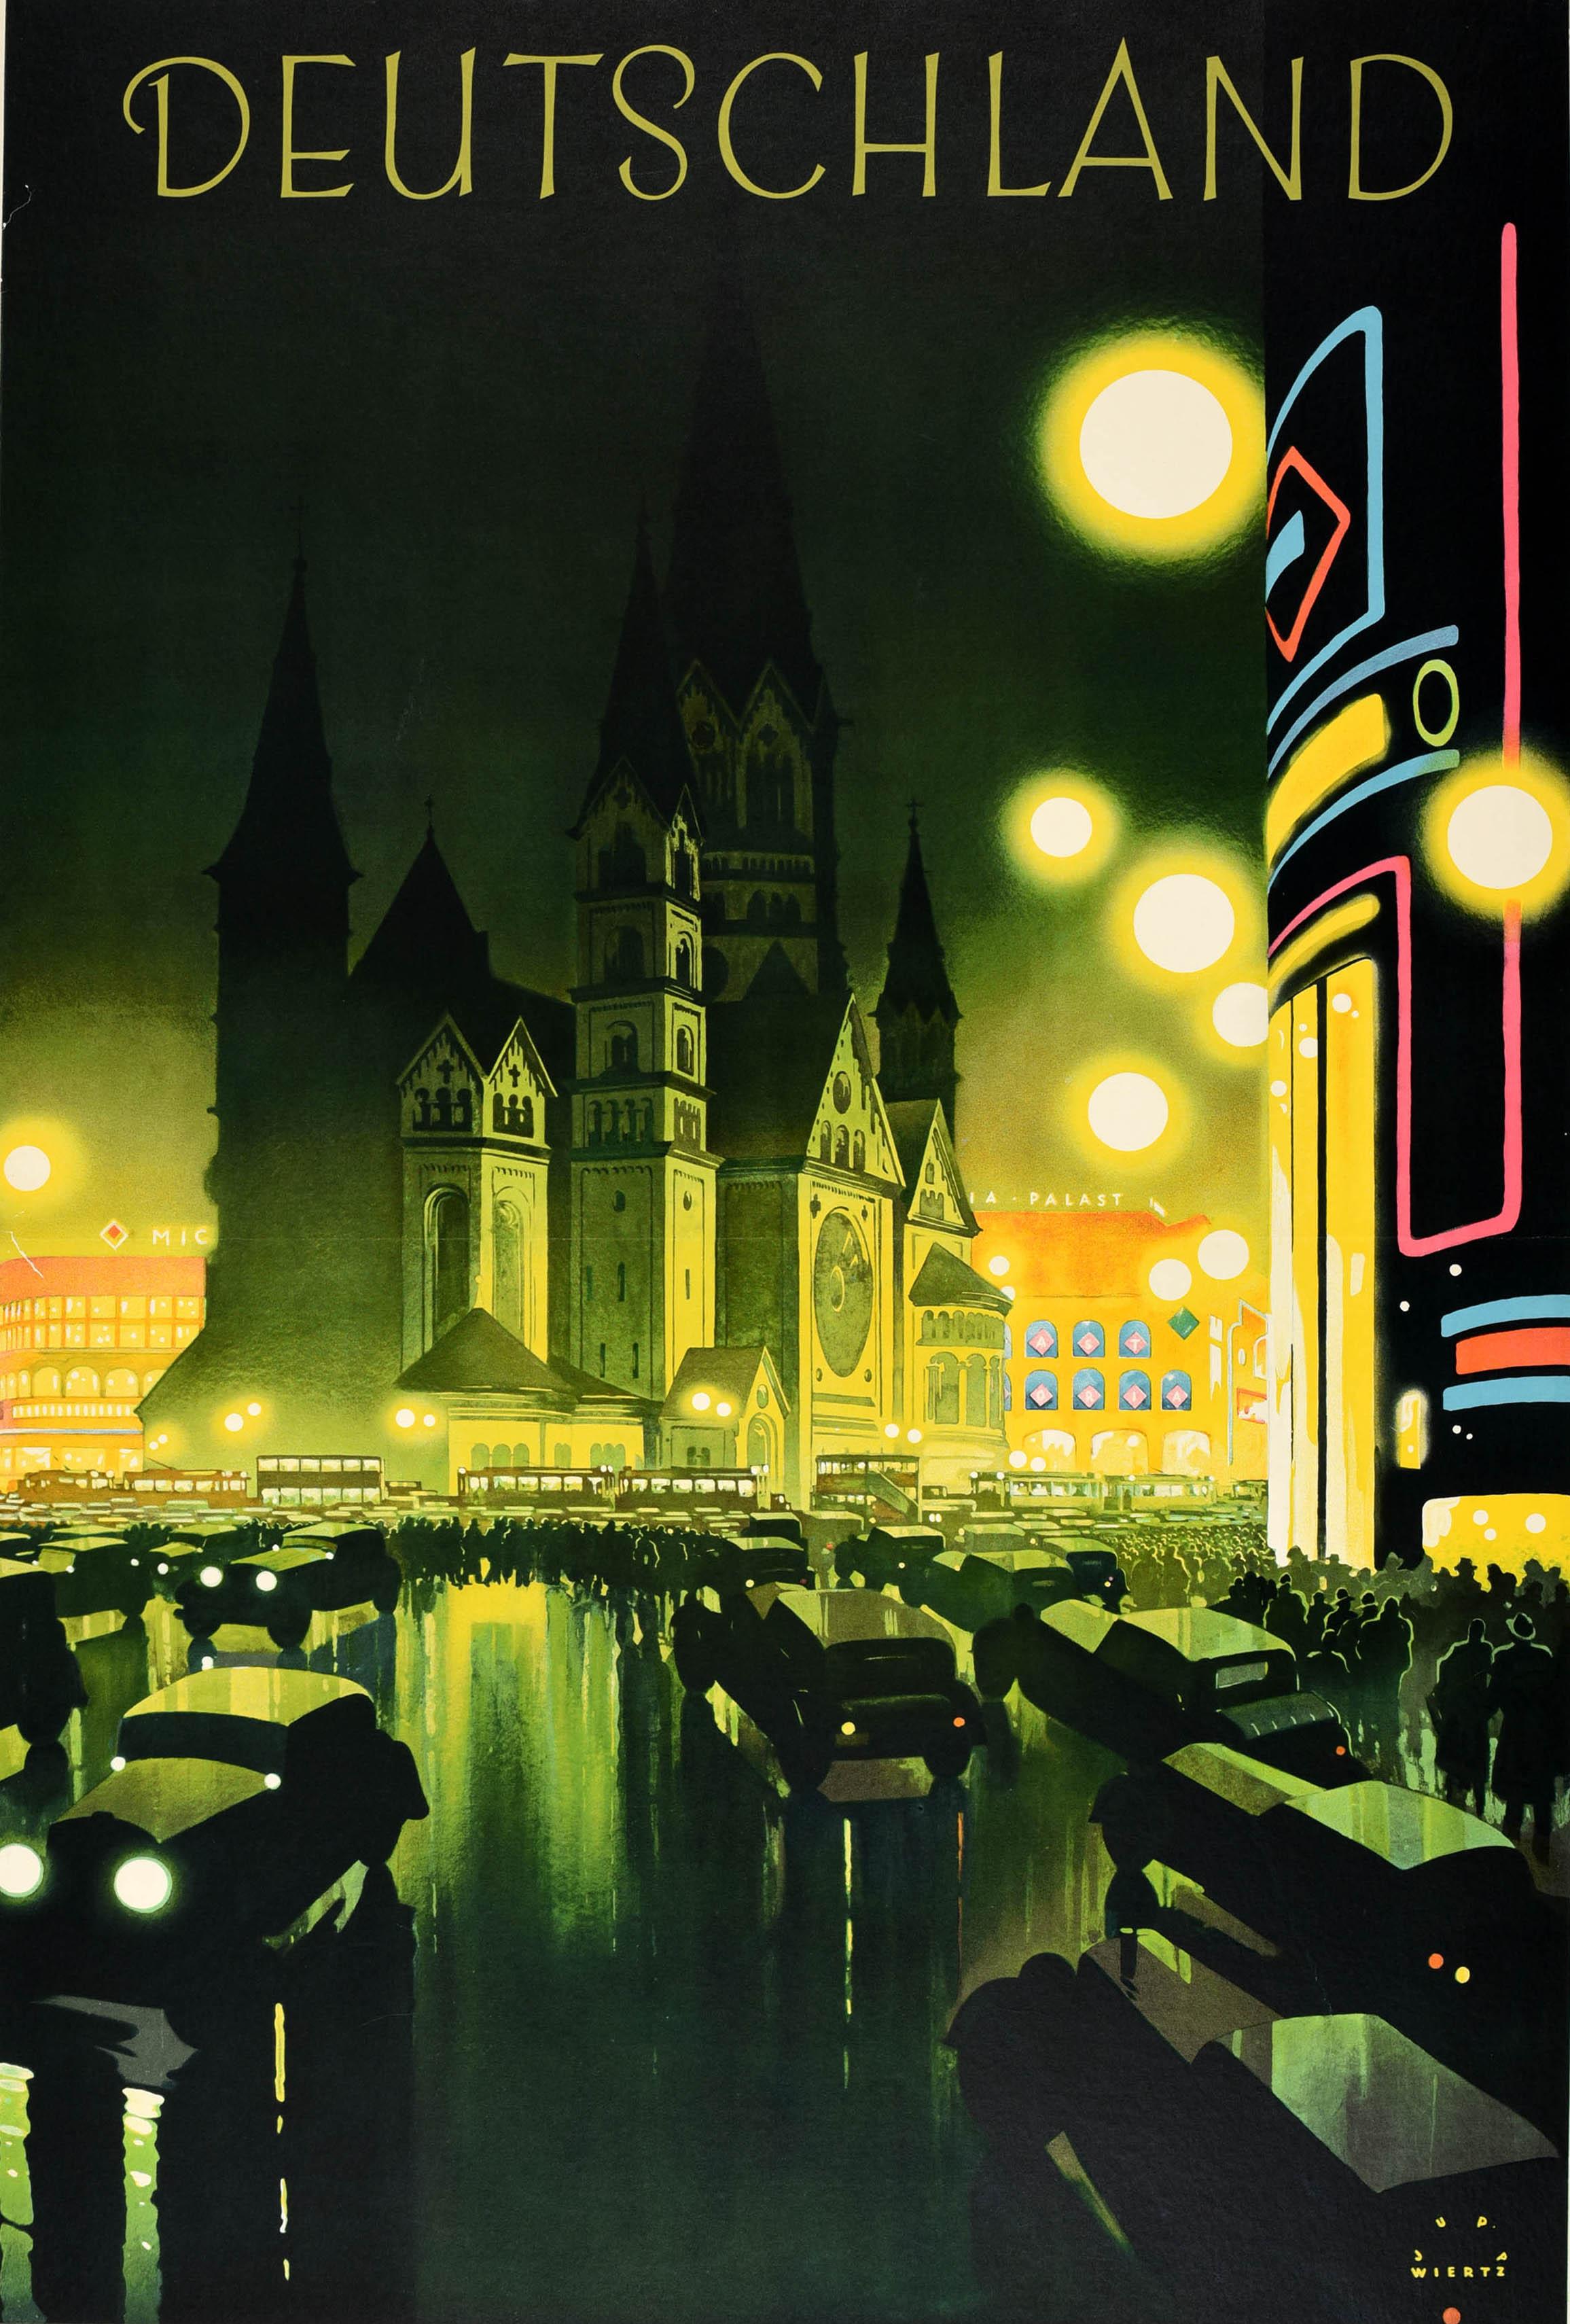 Original vintage travel advertising poster for Germany / Deutschland published by the German State Railway featuring a stunning design by the notable German graphic designer and poster artist Jupp Wiertz (Joseph Lambert Wiertz; 1888-1939) showing a